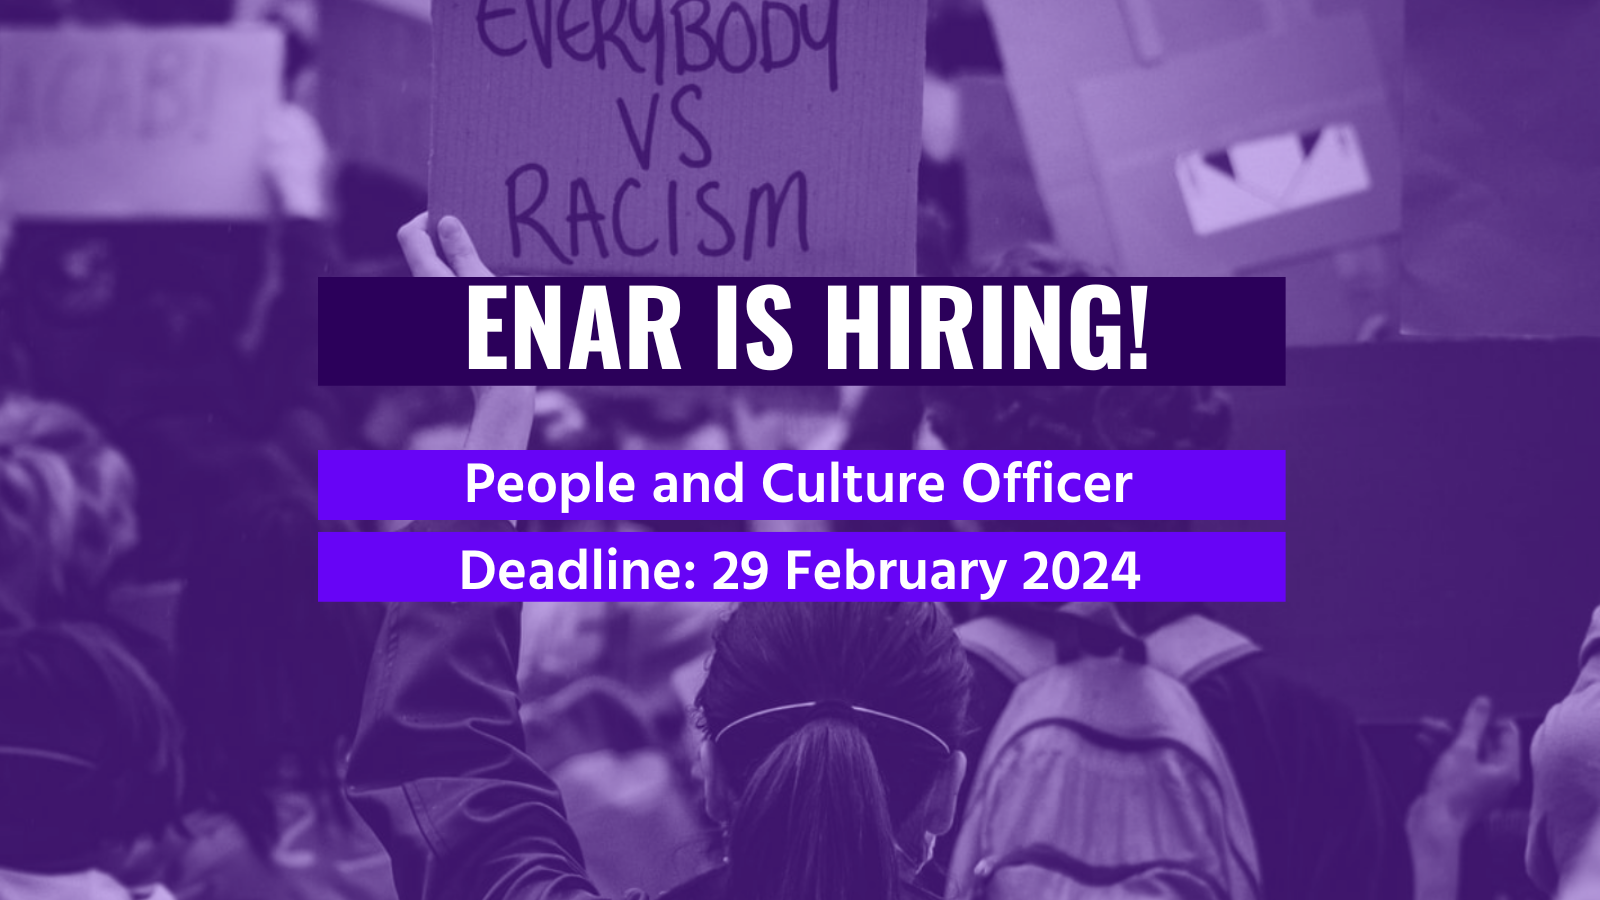 ENAR hiring a People and Culture Officer deadline 29 Feb 2024